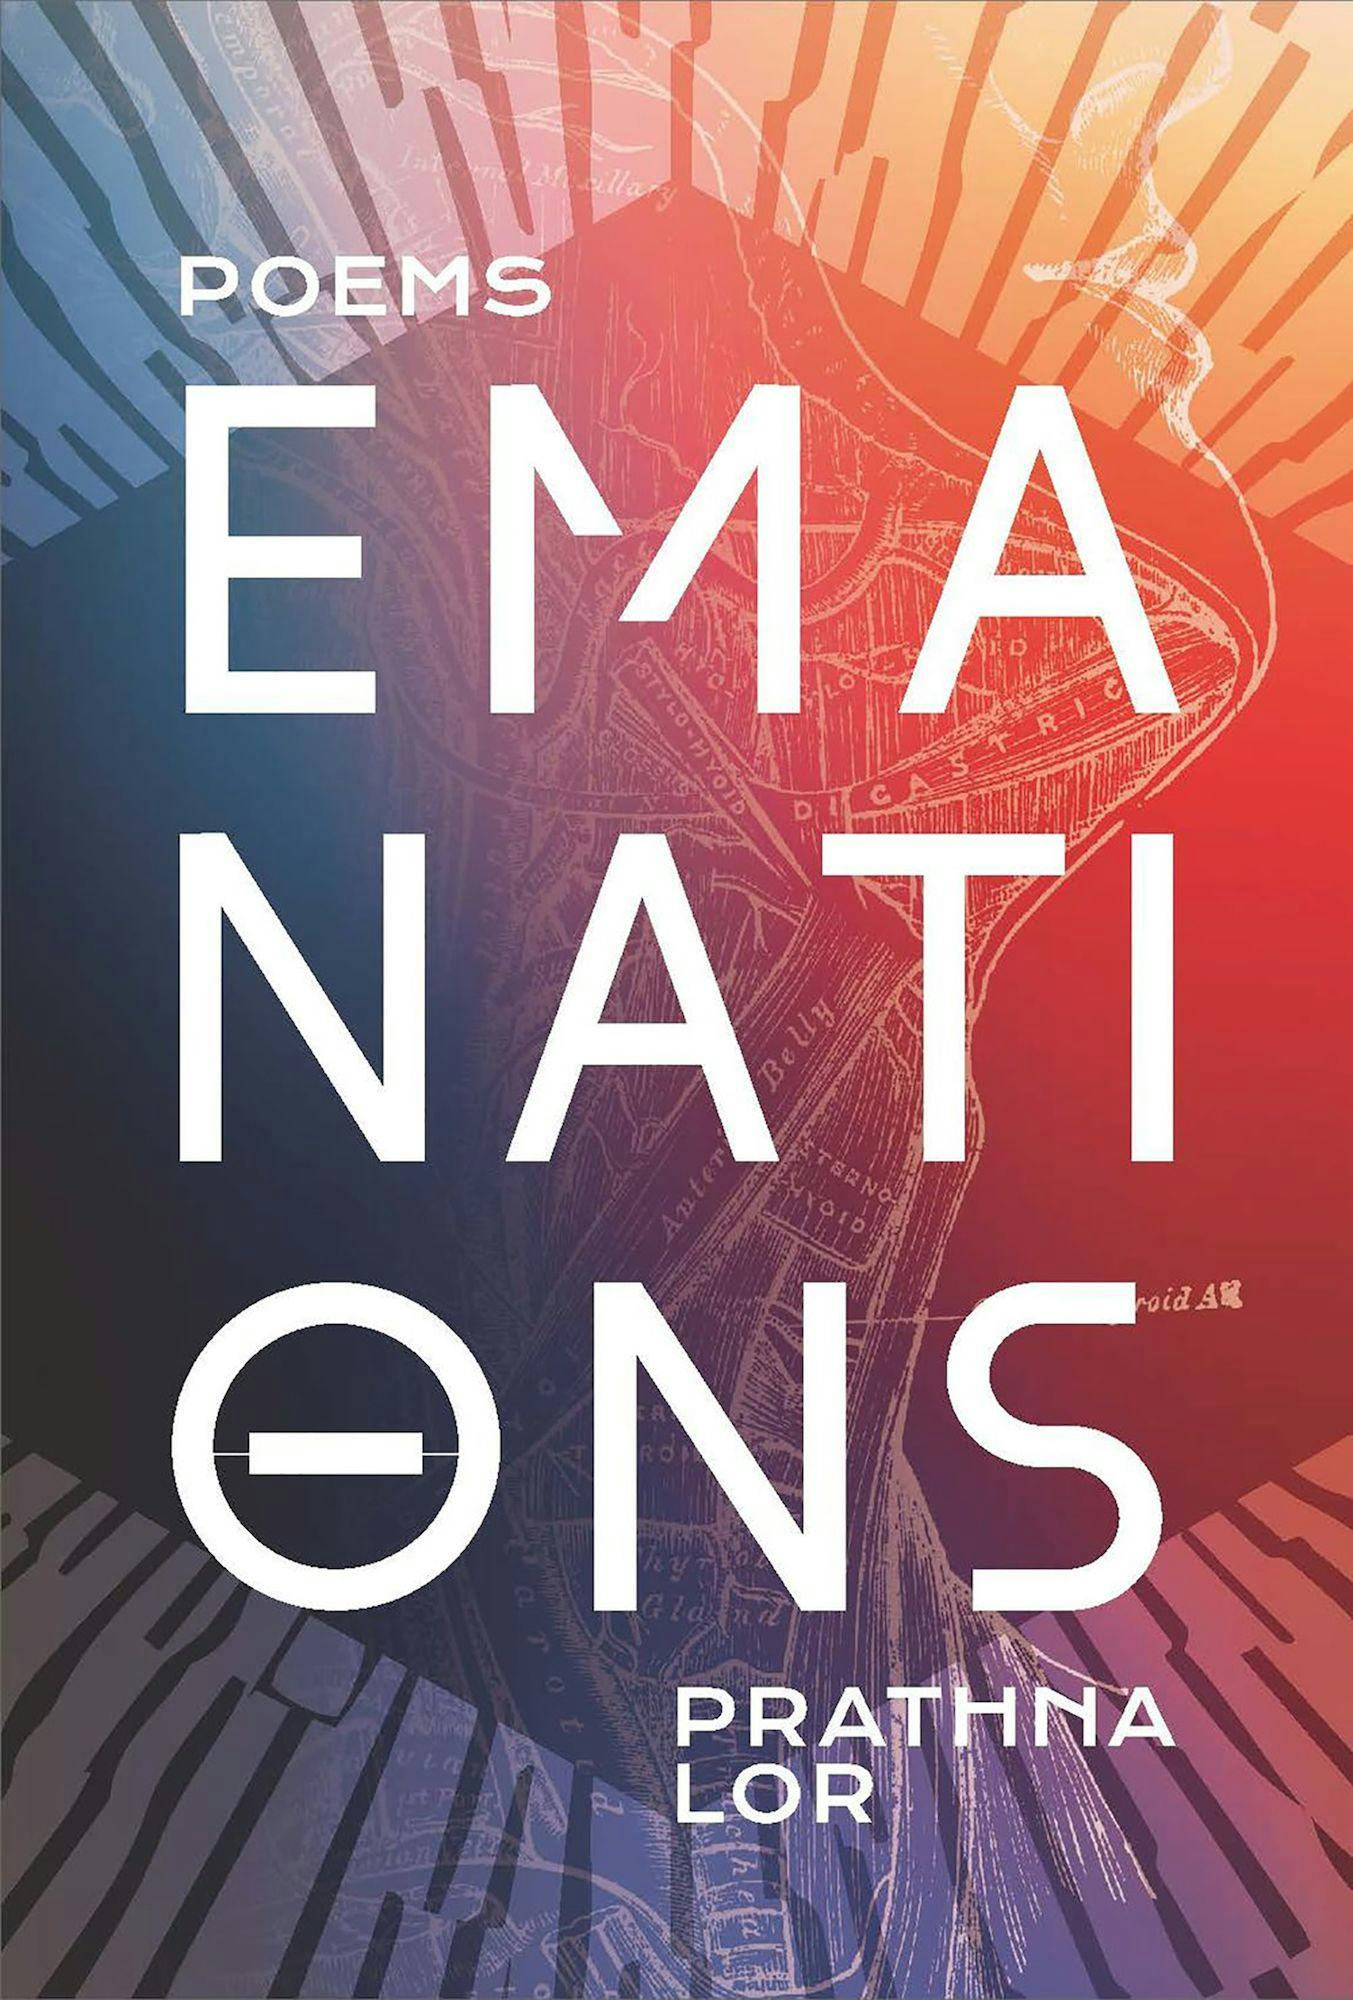 Cover of poetry collection Emanations by Prathna Lor.